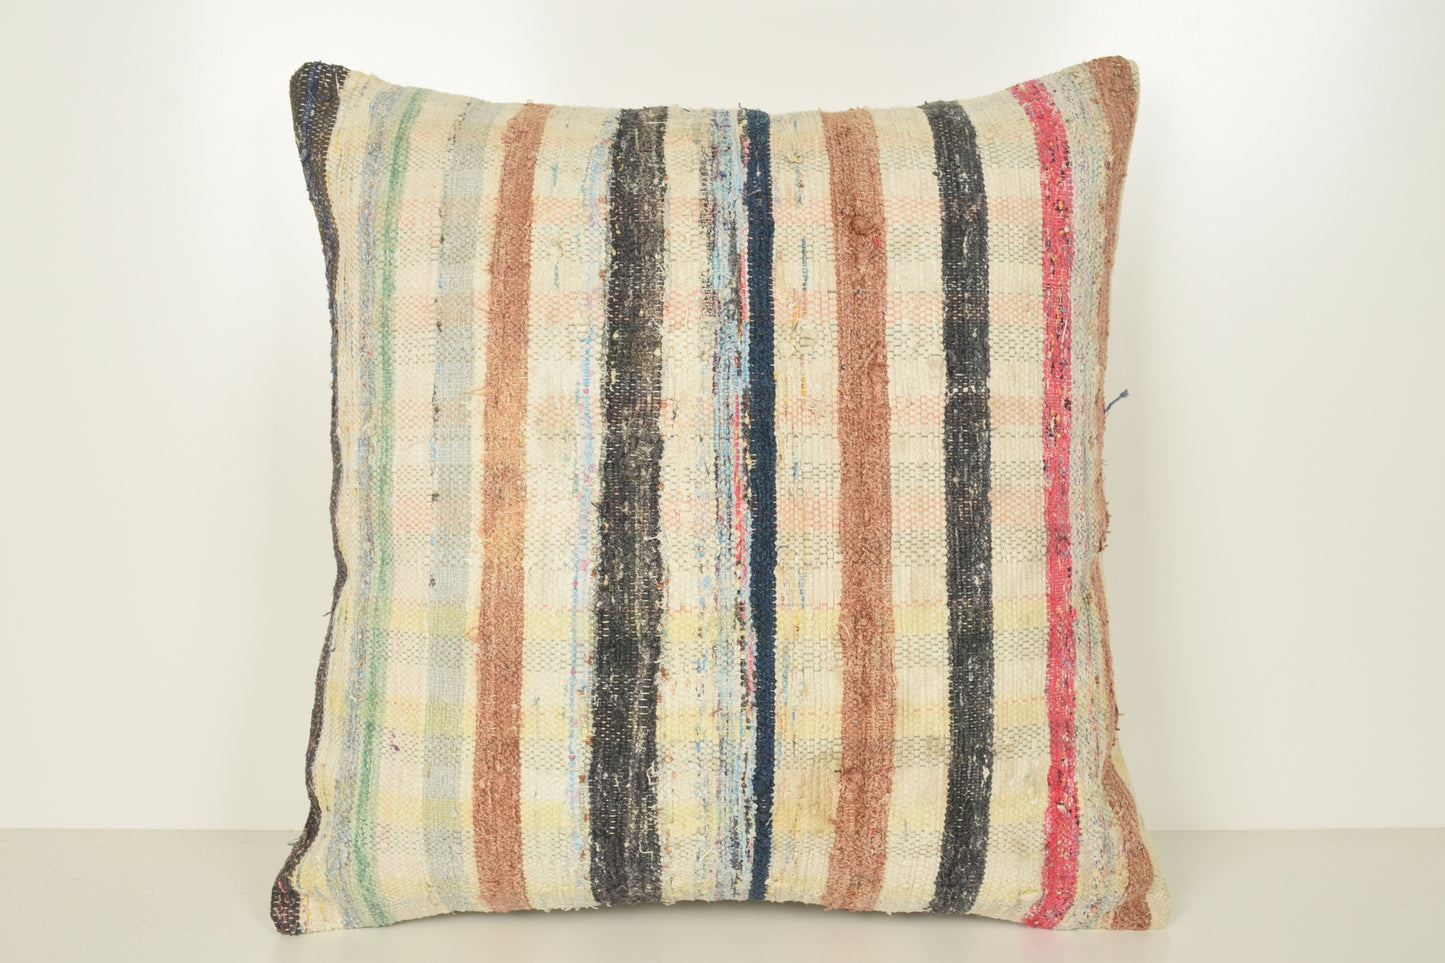 Kilim Throw Pillow Covers A00927 24x24 Strong Craft Room Novelty